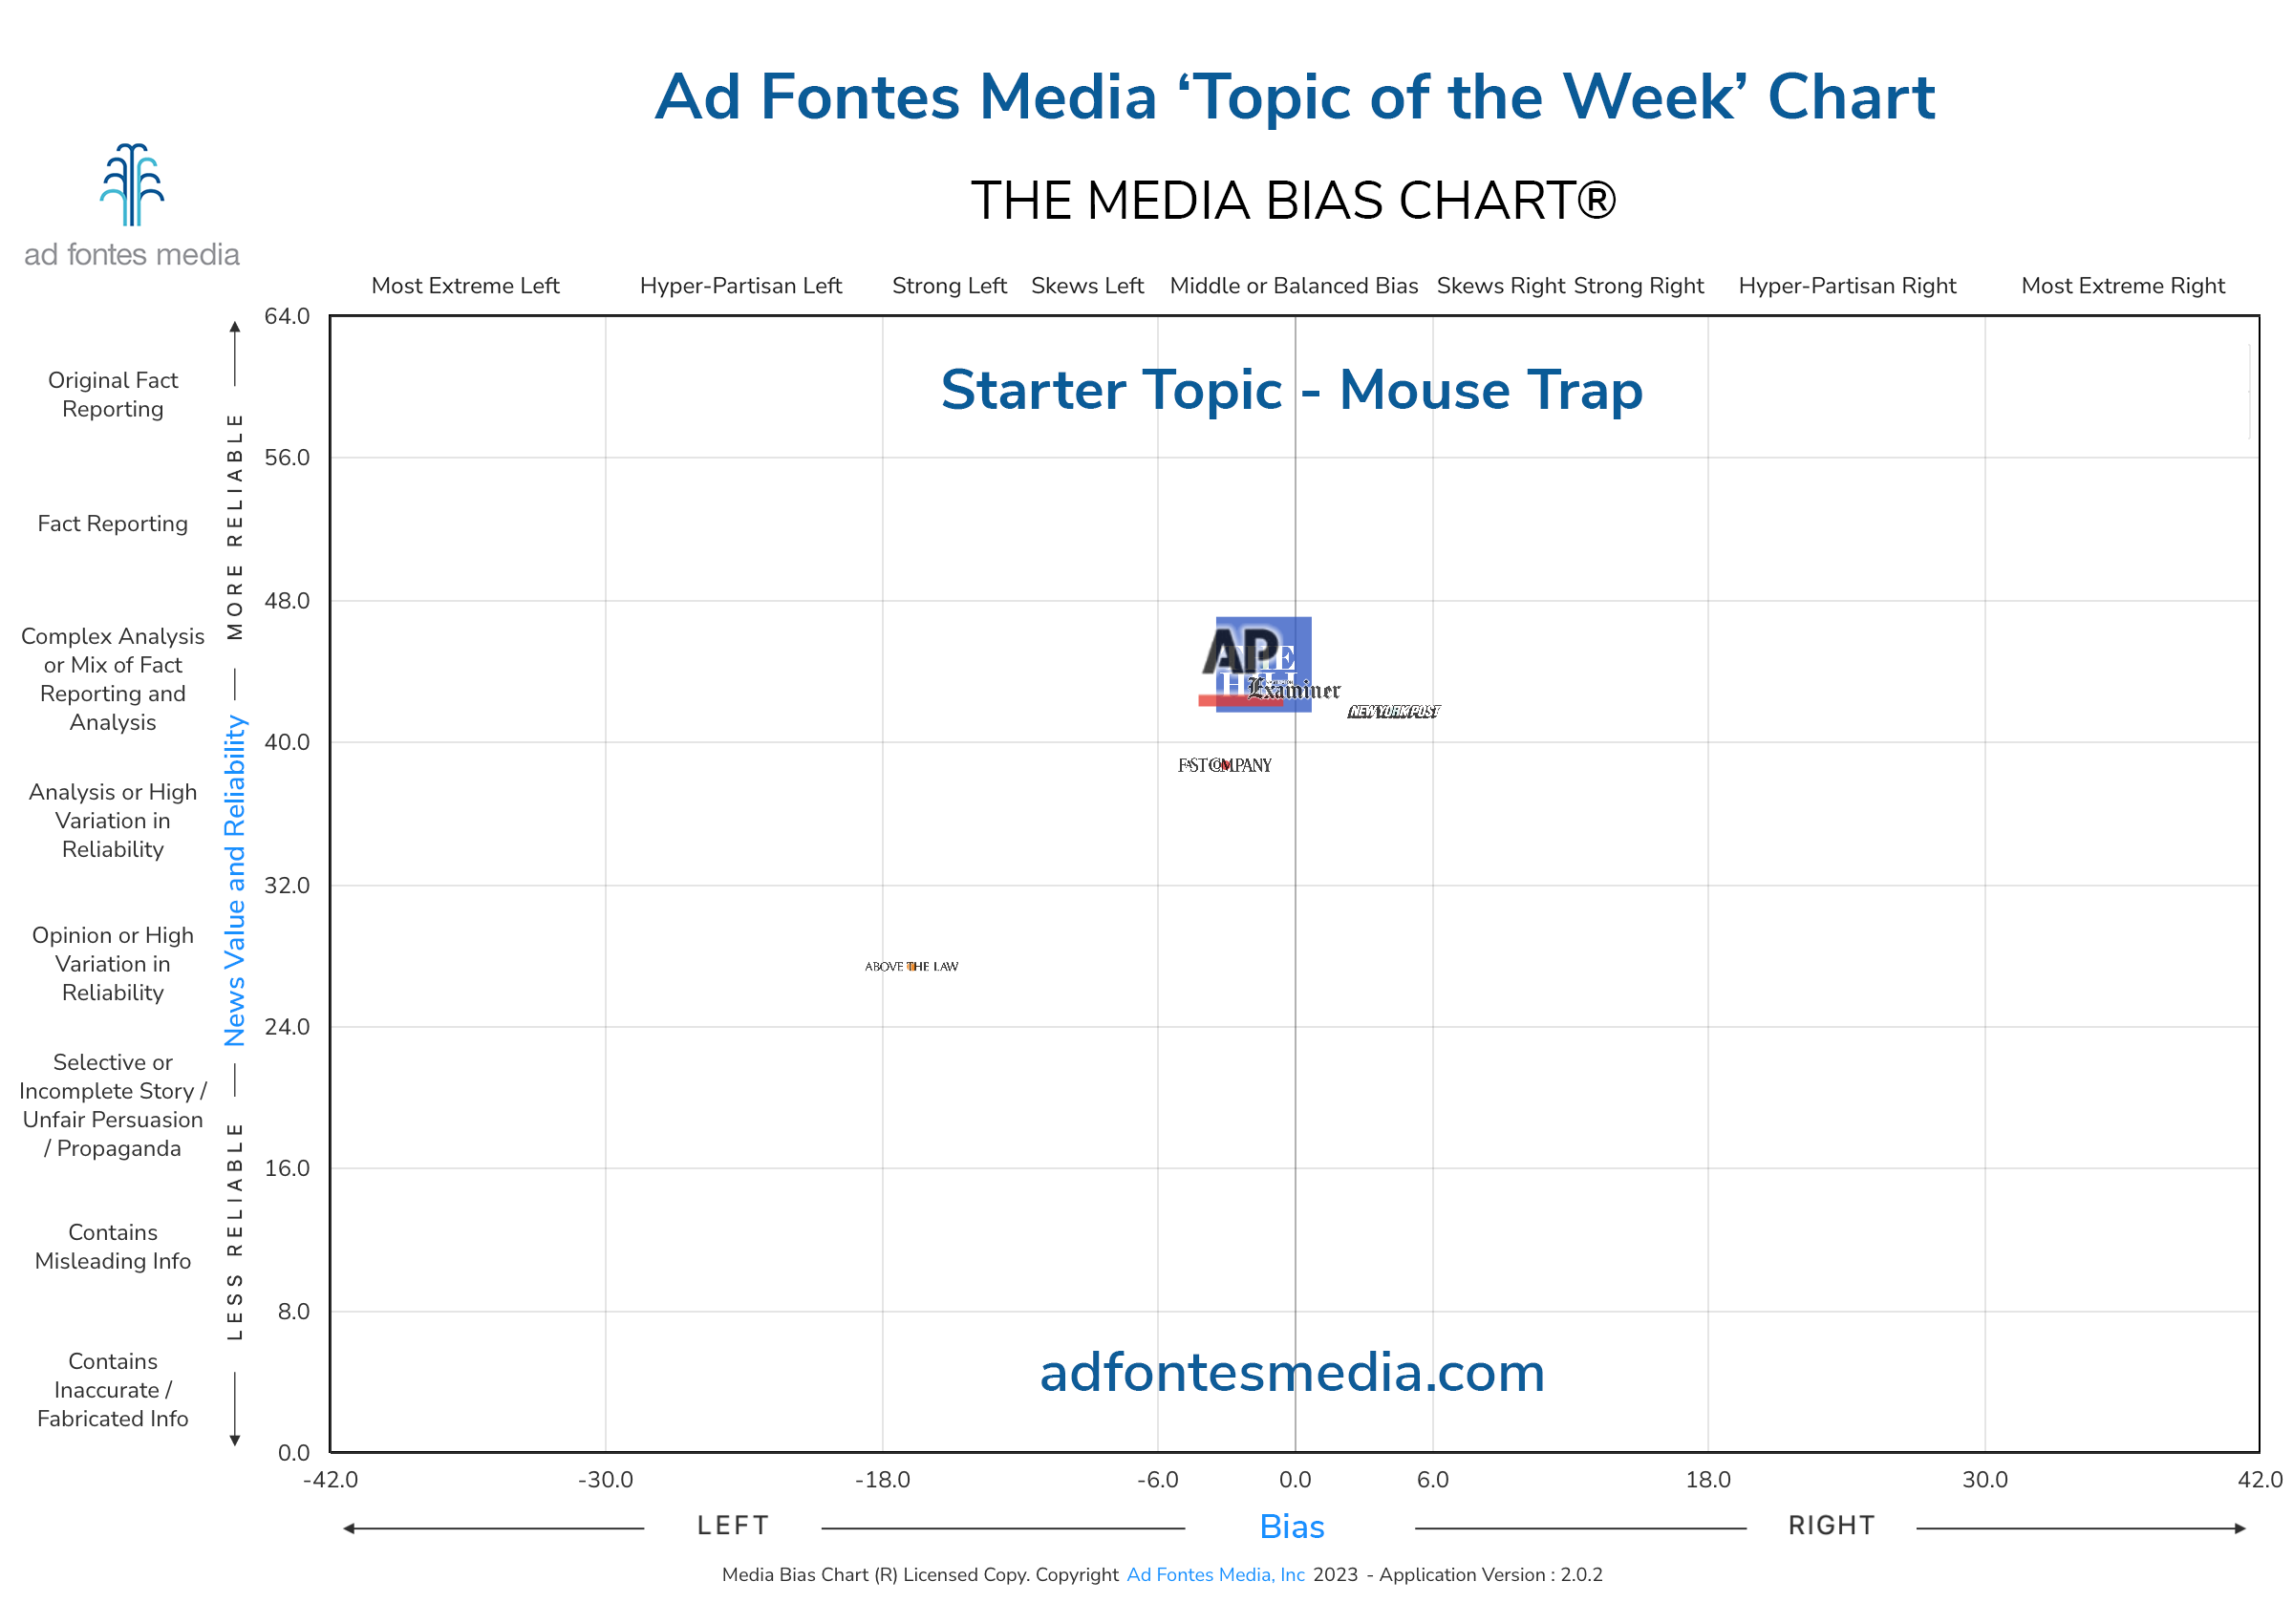 Scores of the Mouse Trap articles on the chart